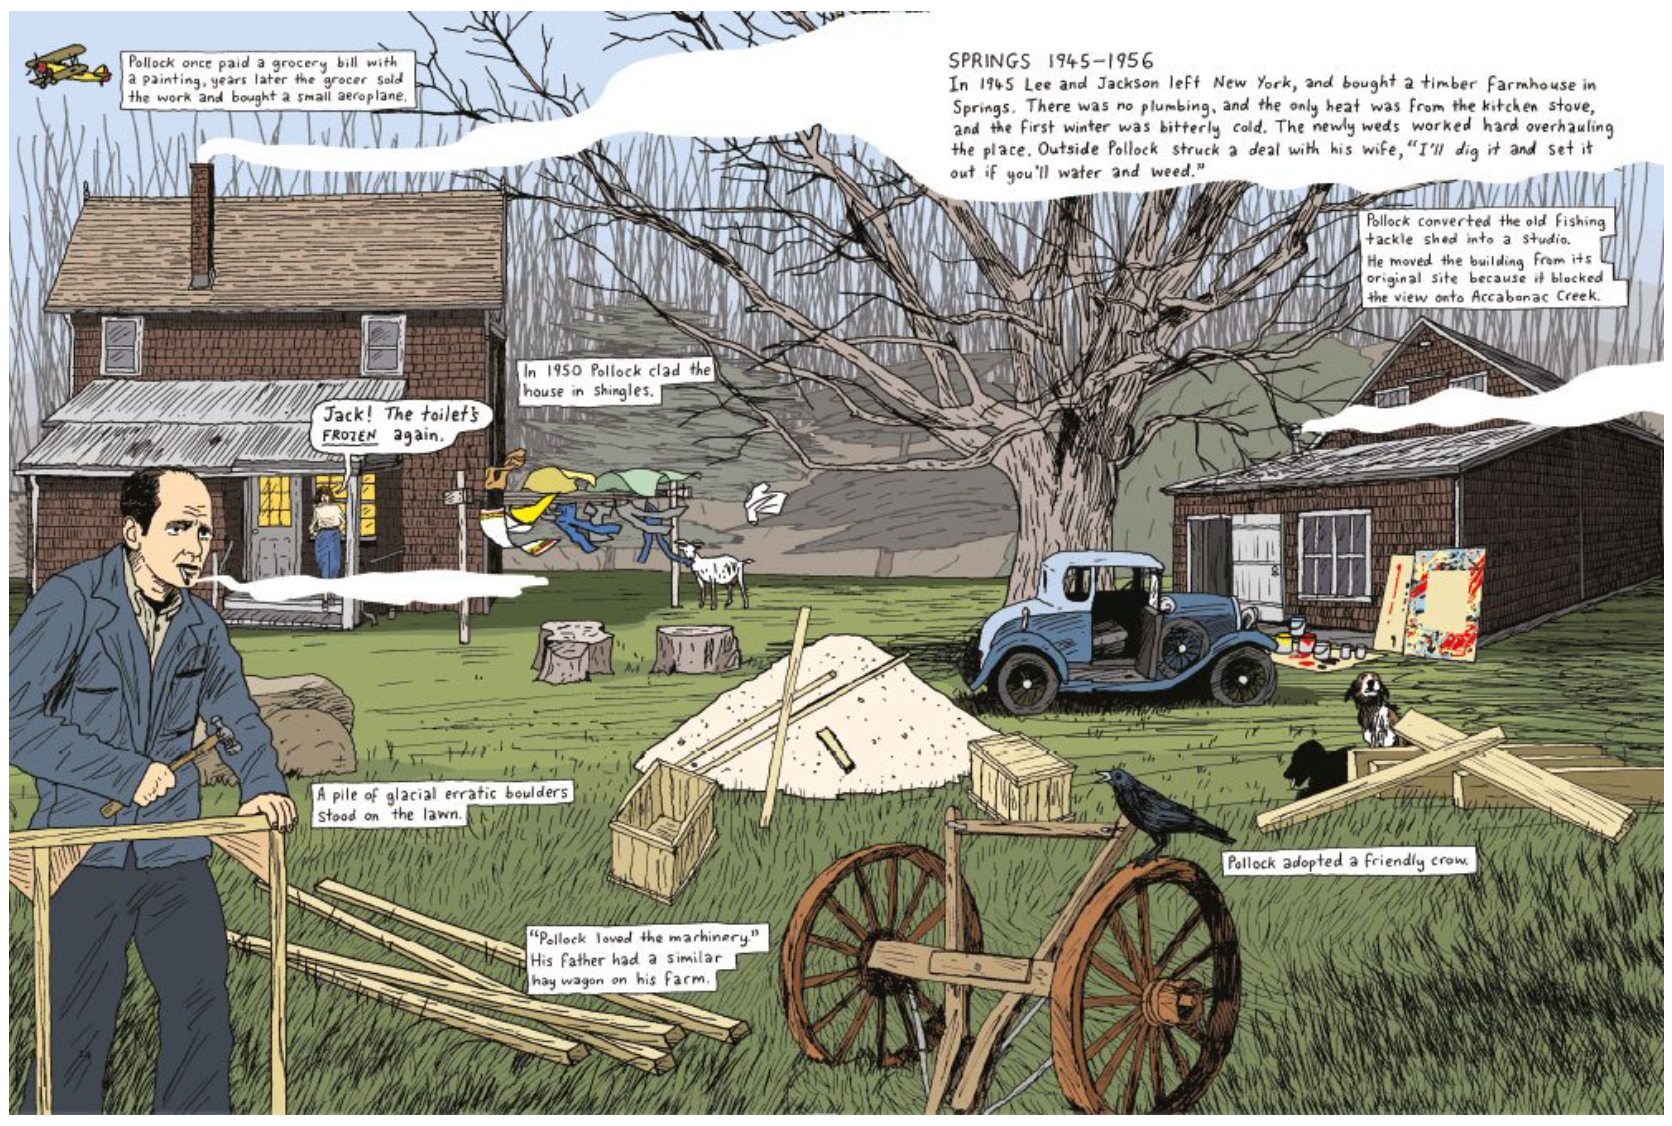 Inside page from “This is Pollock”. Illustration of Pollock on a farm in 1945-1956.